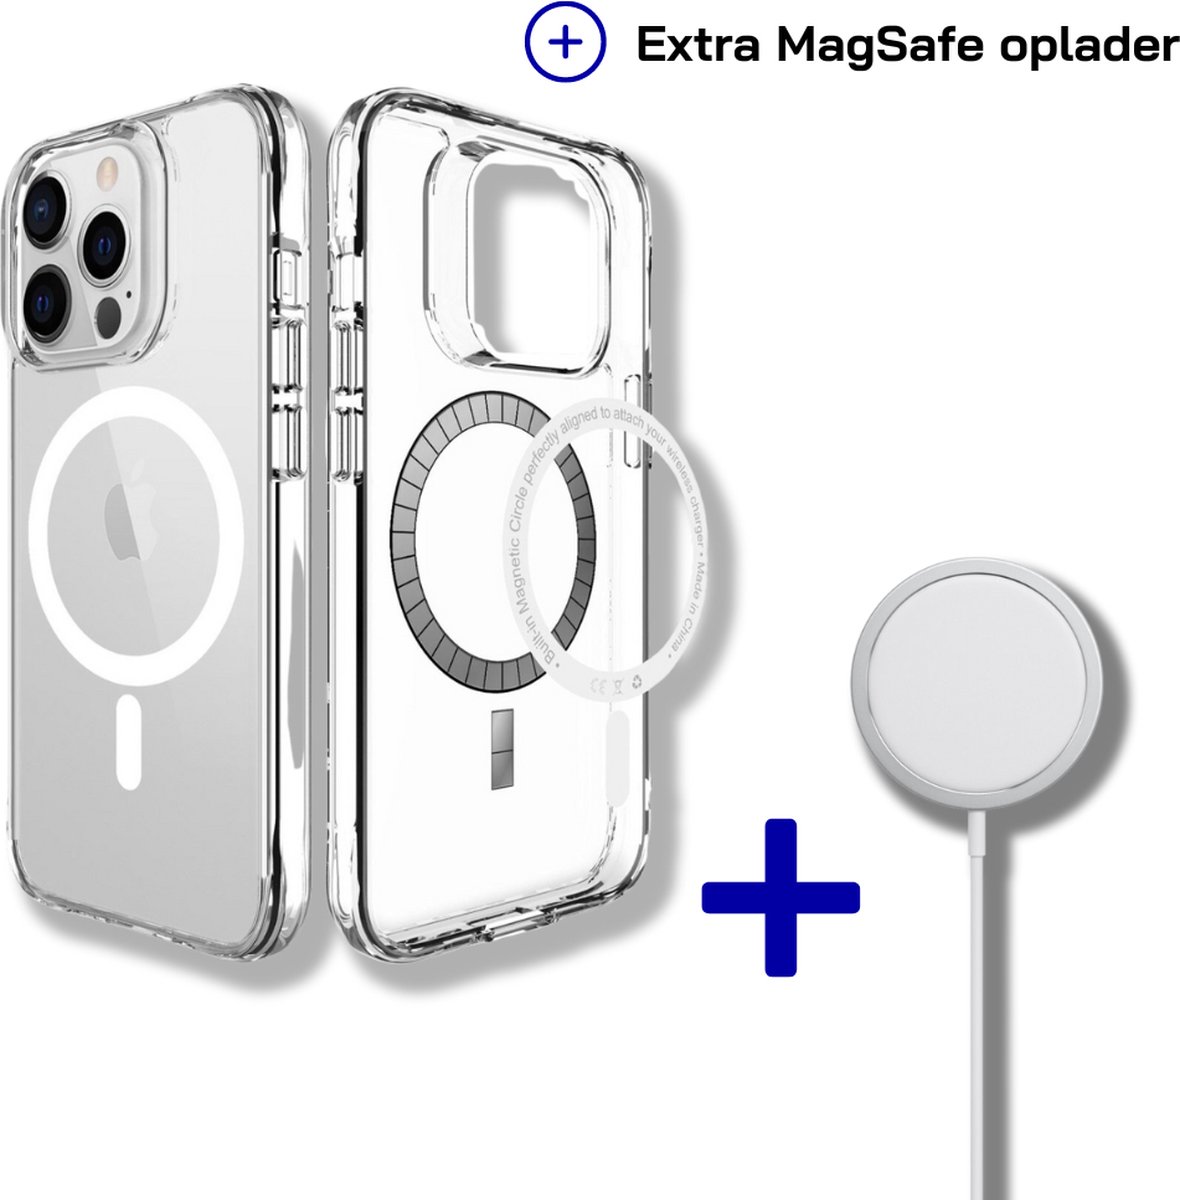 Napolic hoesje magsafe transparant geschikt voor 14 pro max - inclusief magsafe oplader - magsafe case - iphone case